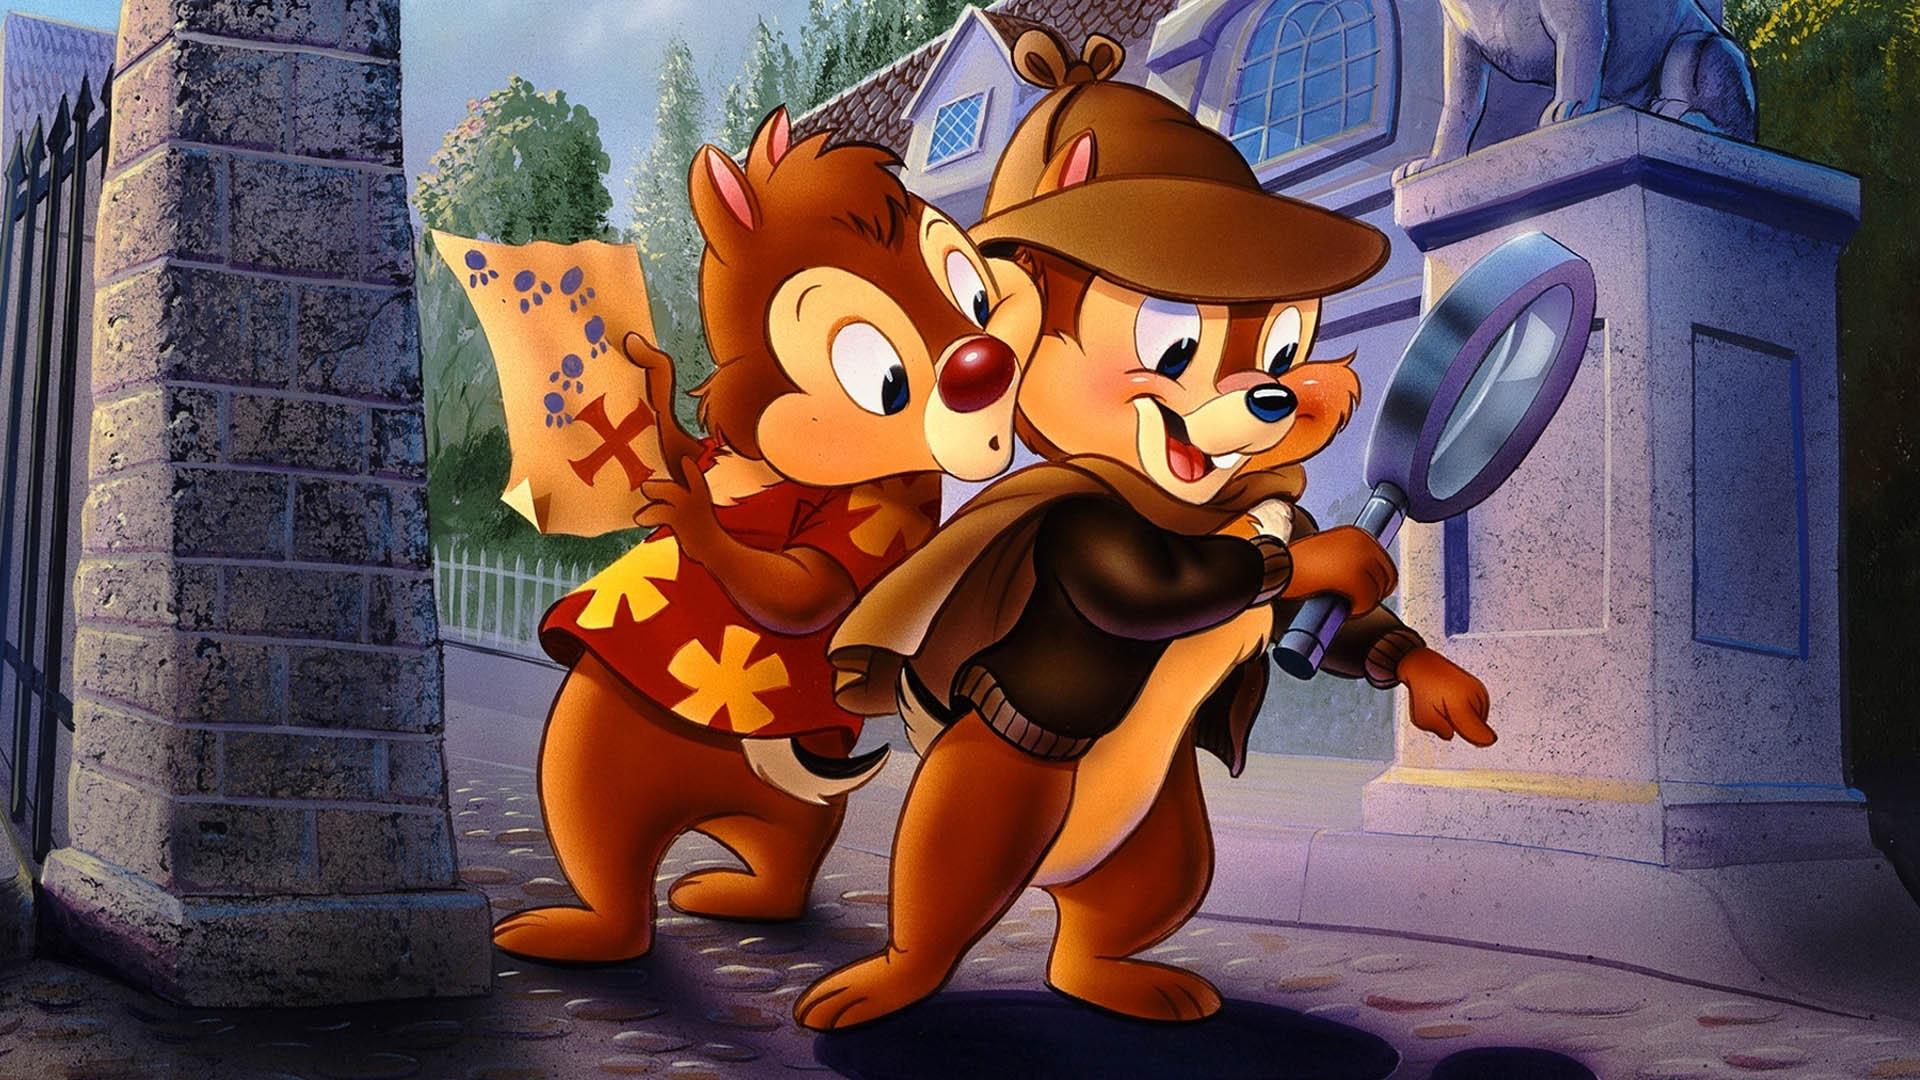 Chip 'N Dale Rescue Rangers Wallpaper High Quality